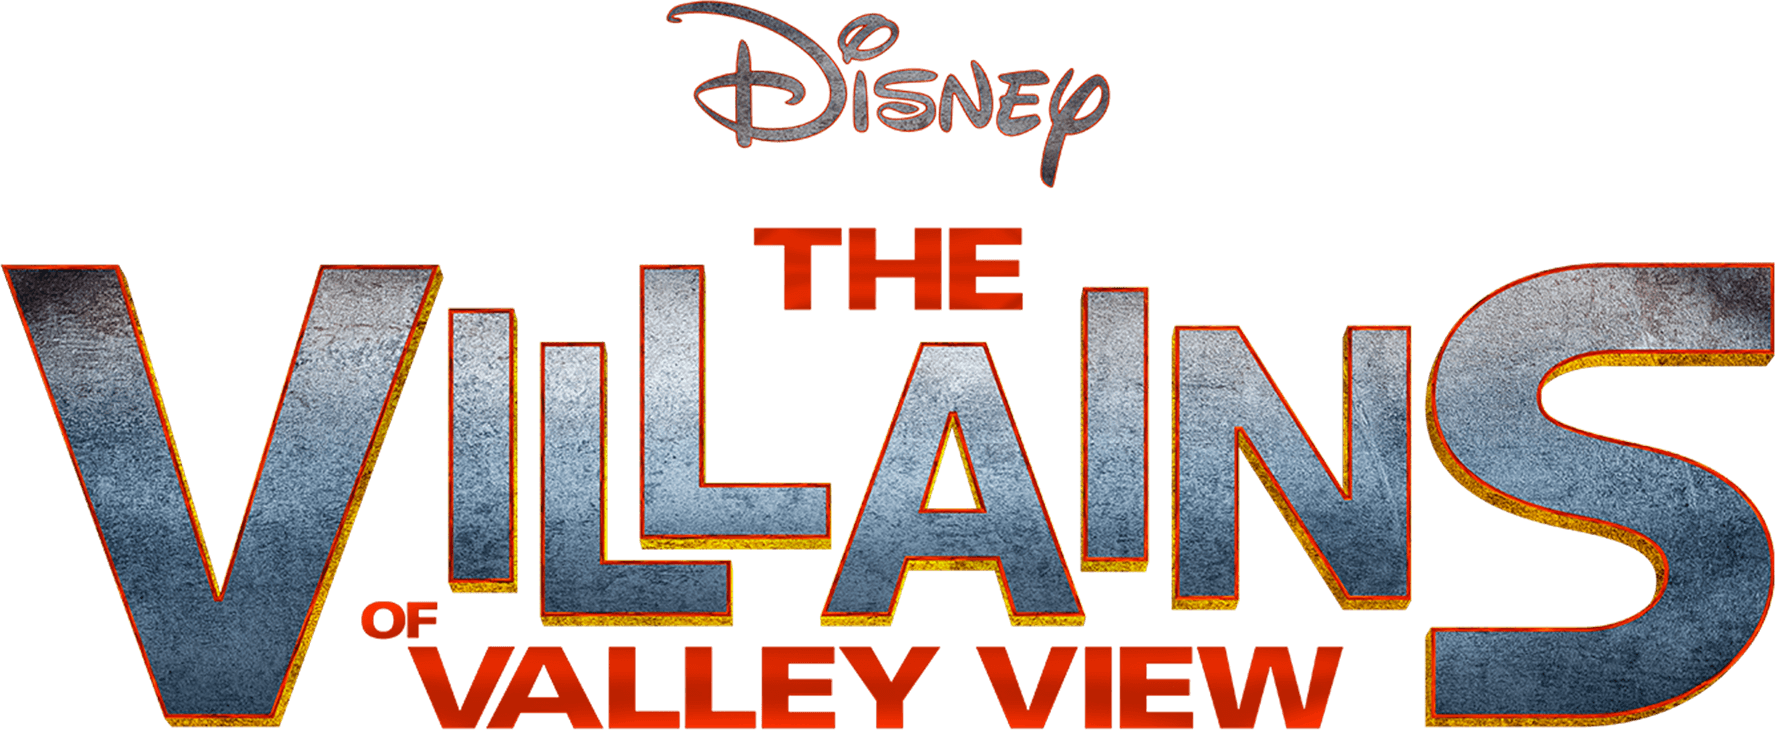 The Villains of Valley View logo